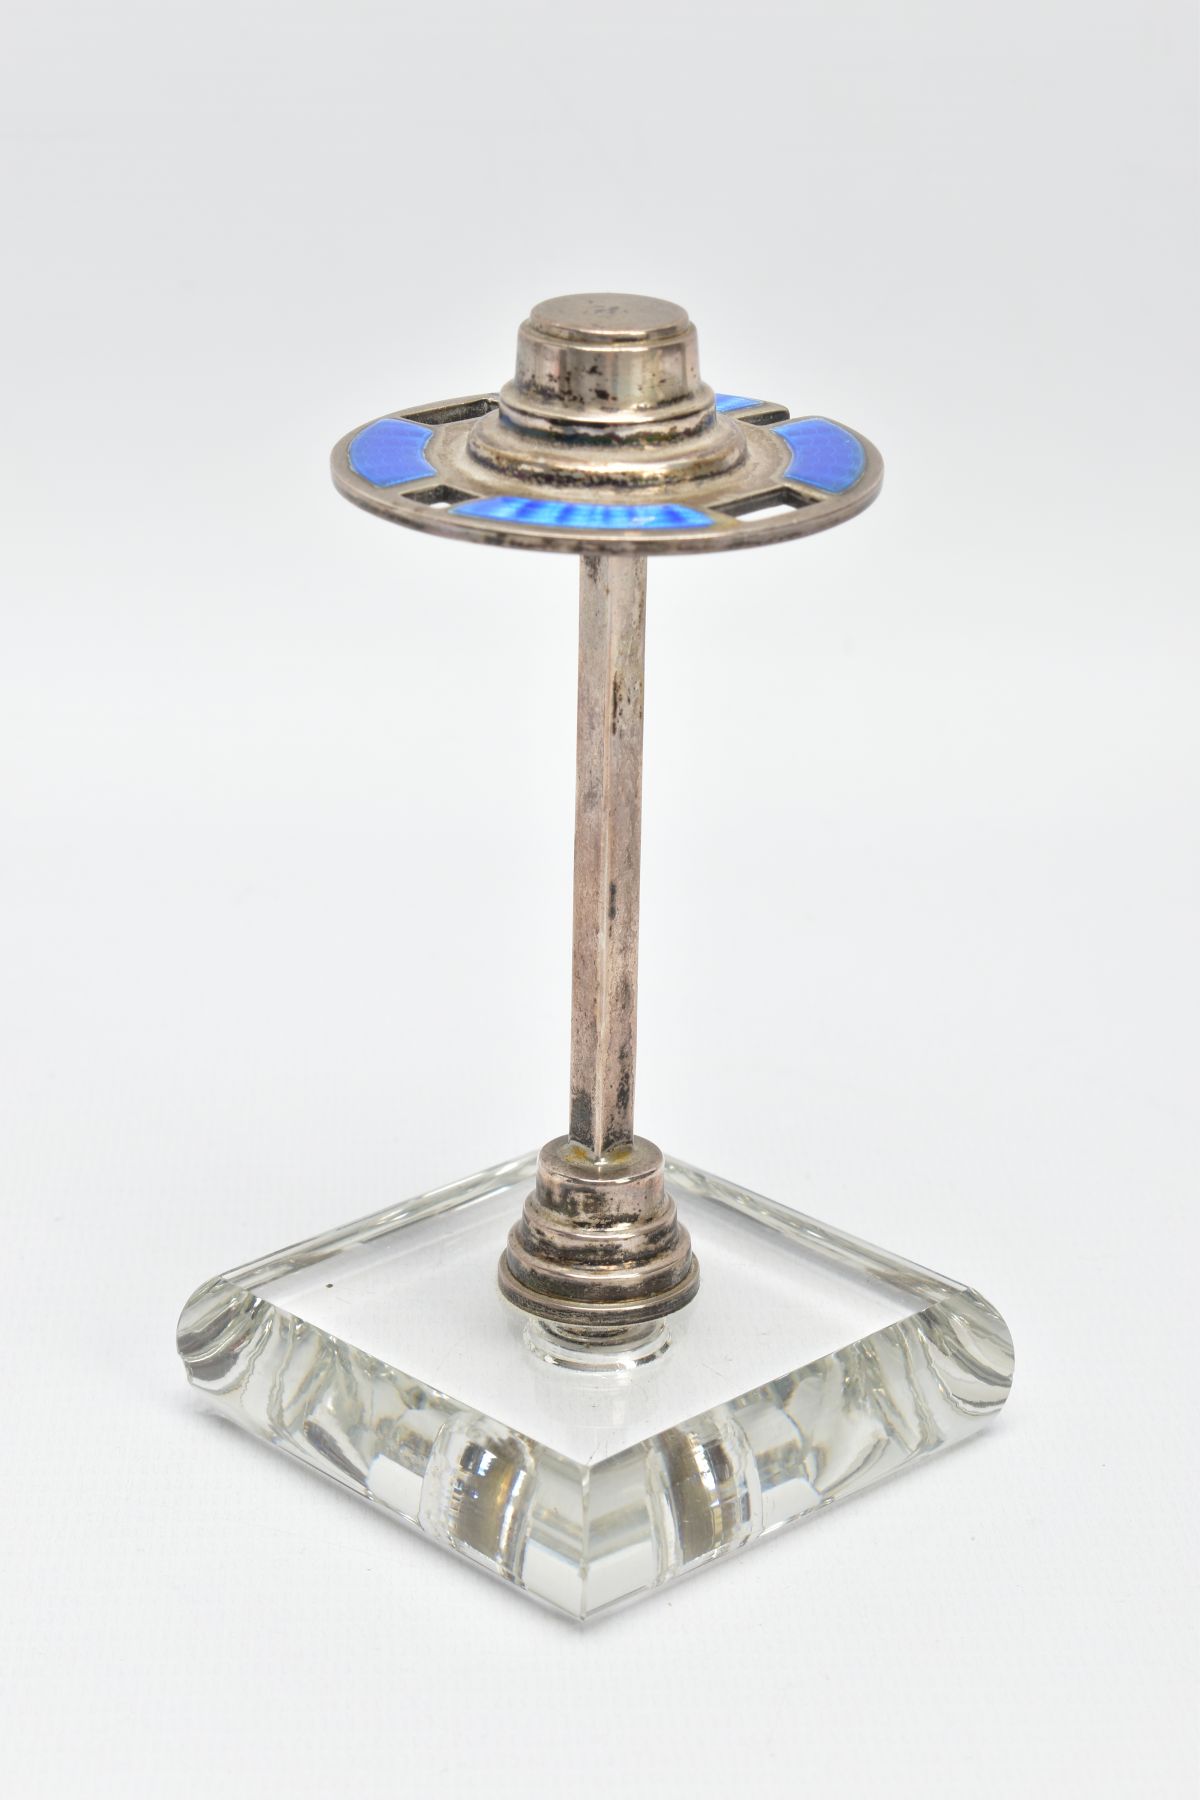 A 1930S SILVER ENAMEL MANICURE STAND, a circular silver stand with blue guilloche enamel detail